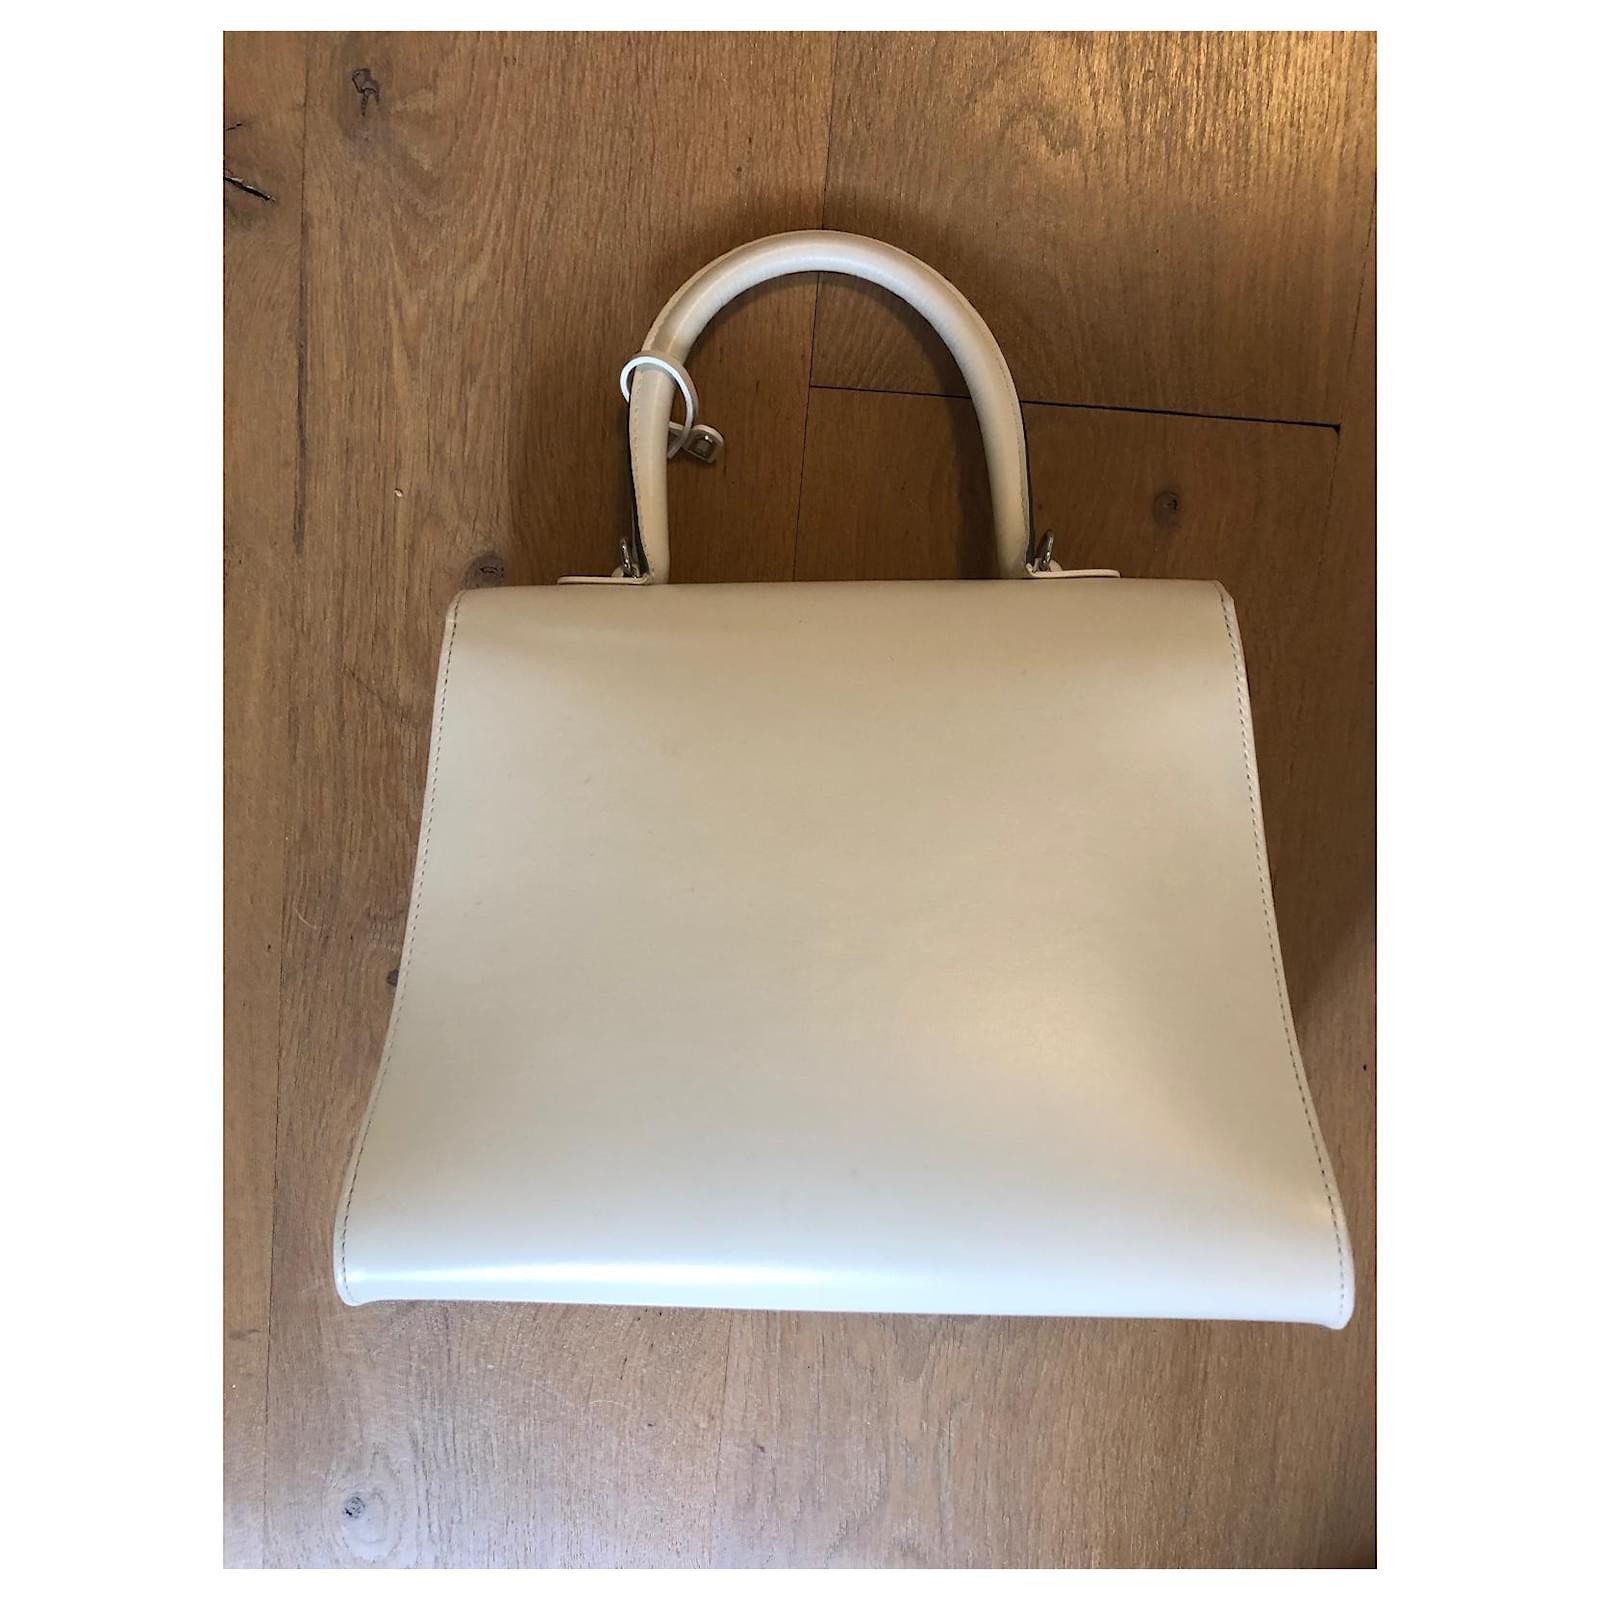 Delvaux The Brilliant MM Ivory - with Grigri Circle GM, Undercover